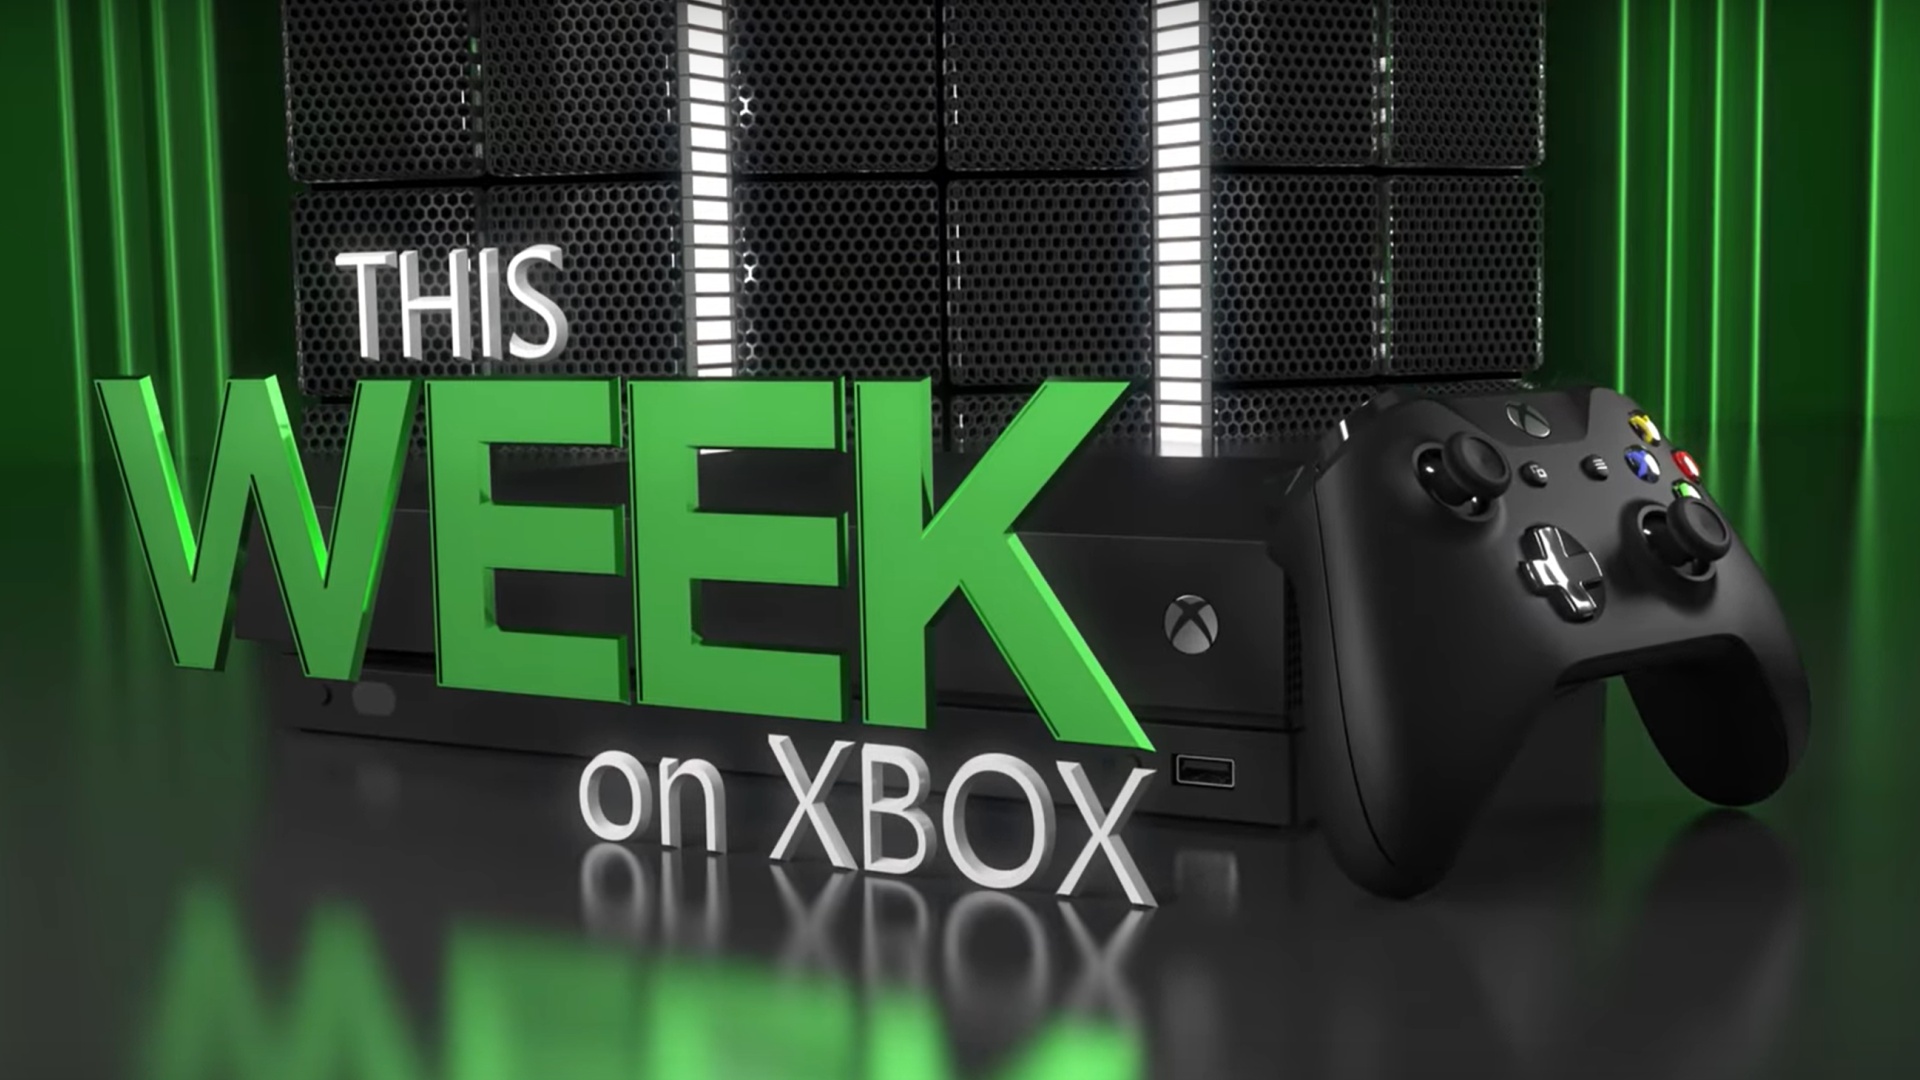 Video For This Week on Xbox: January 17, 2020